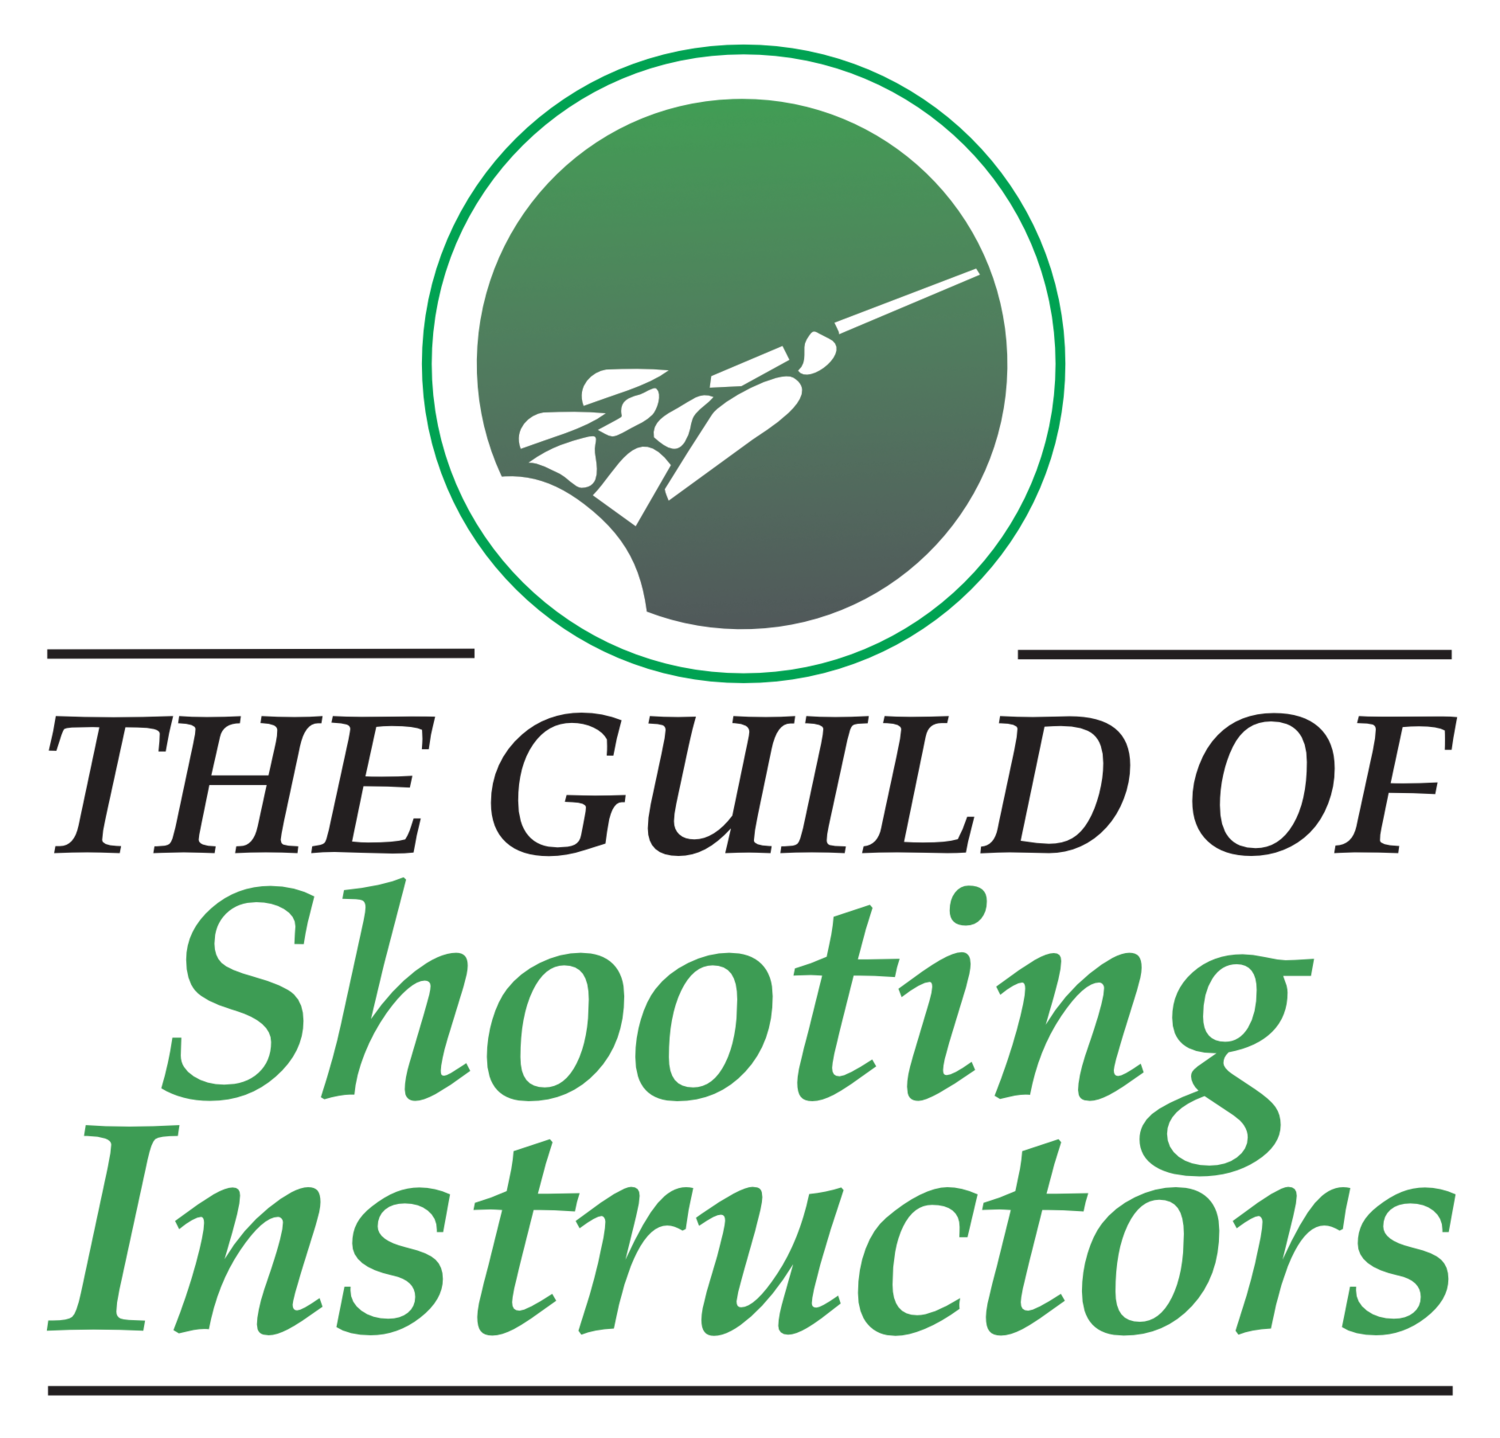 The Guild of Shooting Instructors